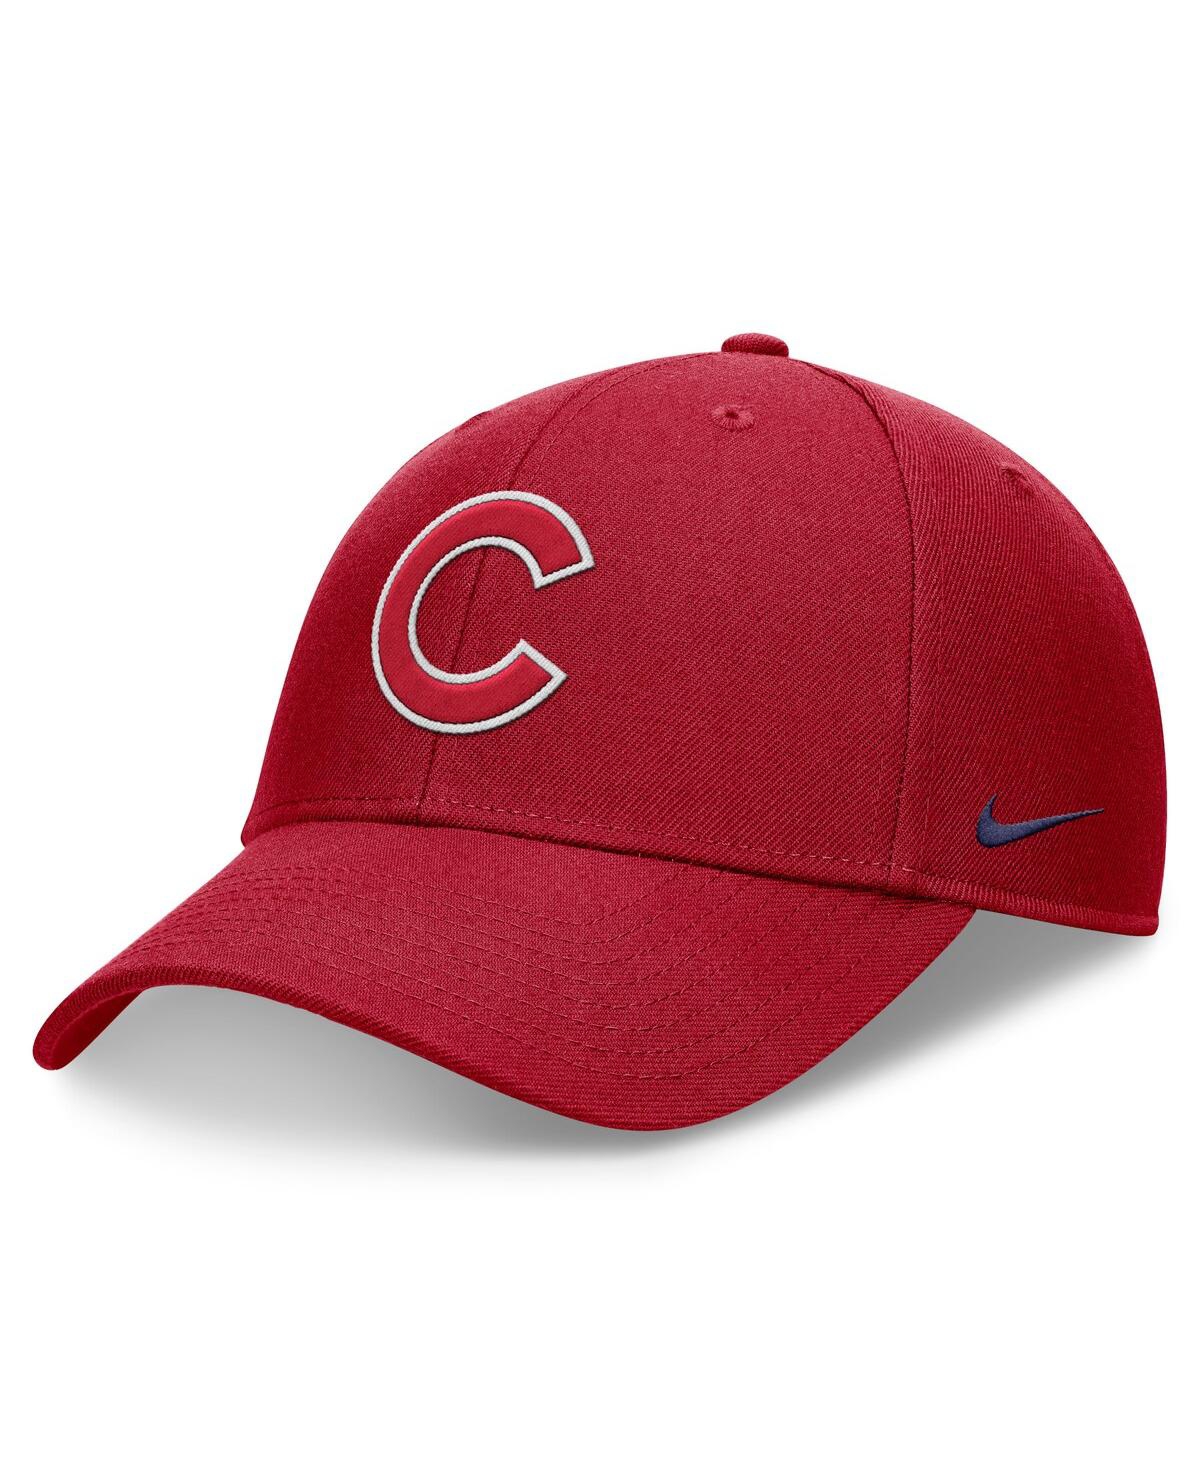 Men's Red Chicago Cubs Evergreen Club Performance Adjustable Hat - Red